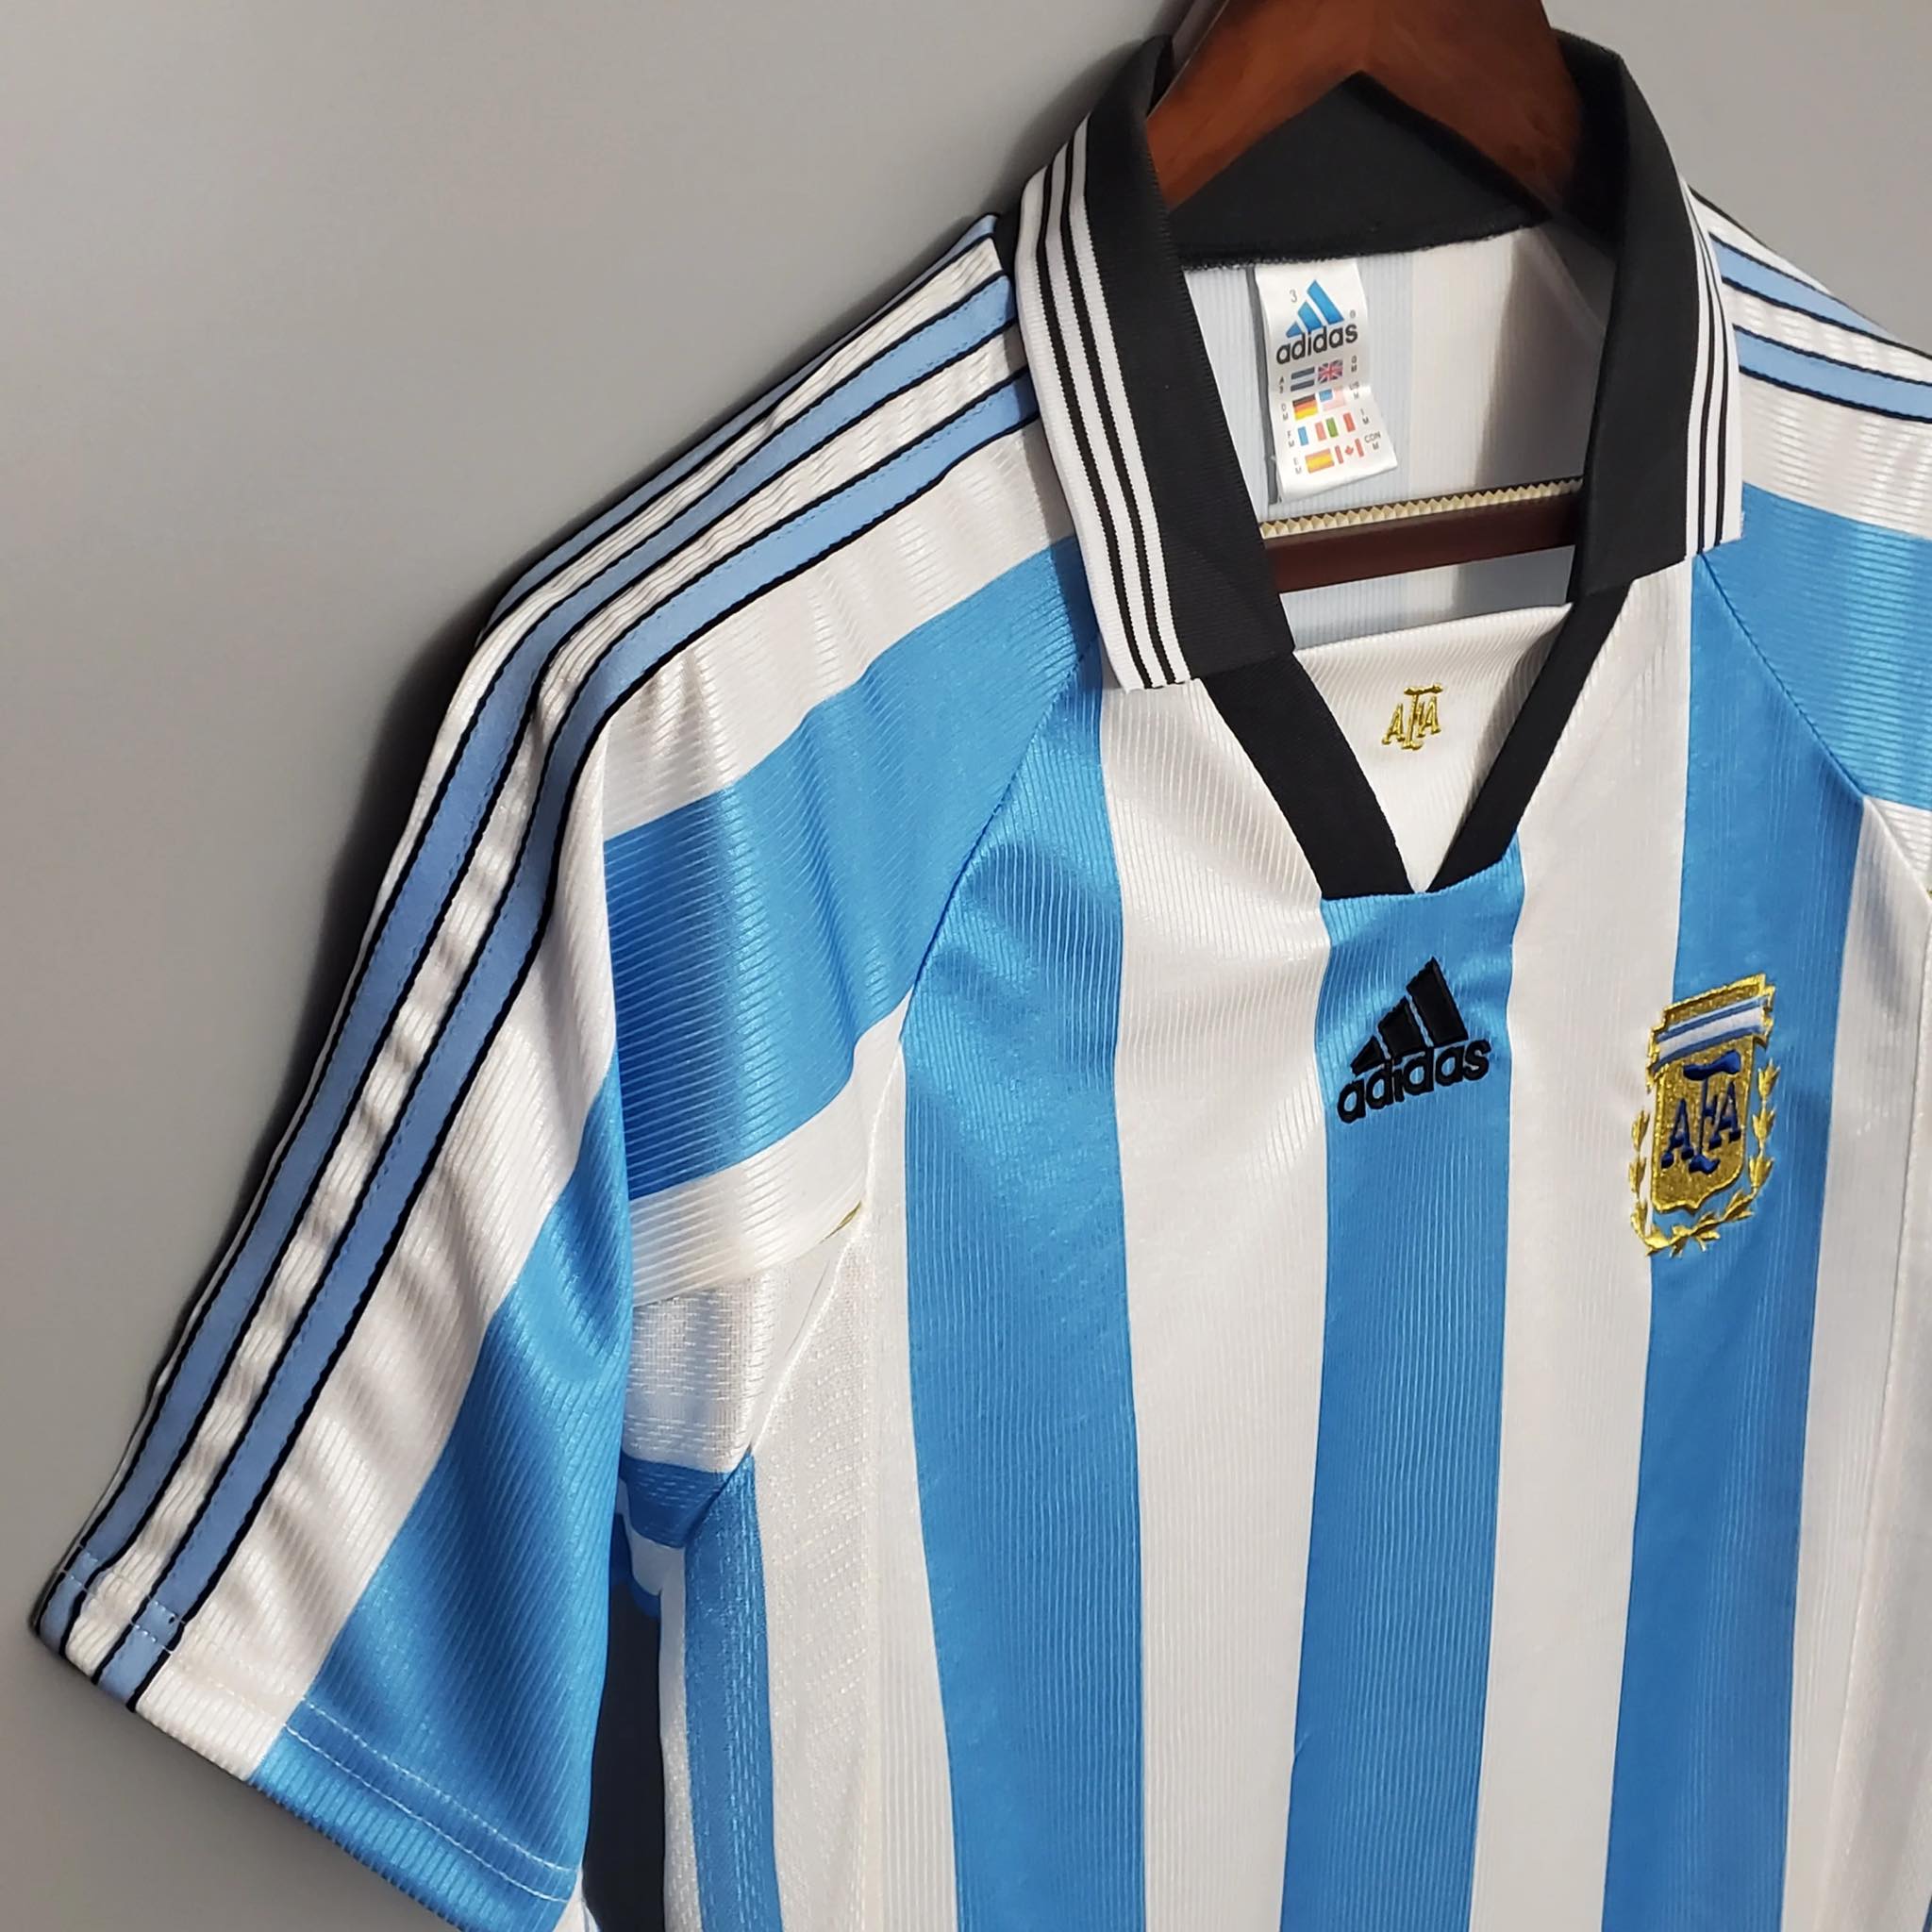 Argentina 1998 World Cup Retro Jersey Home